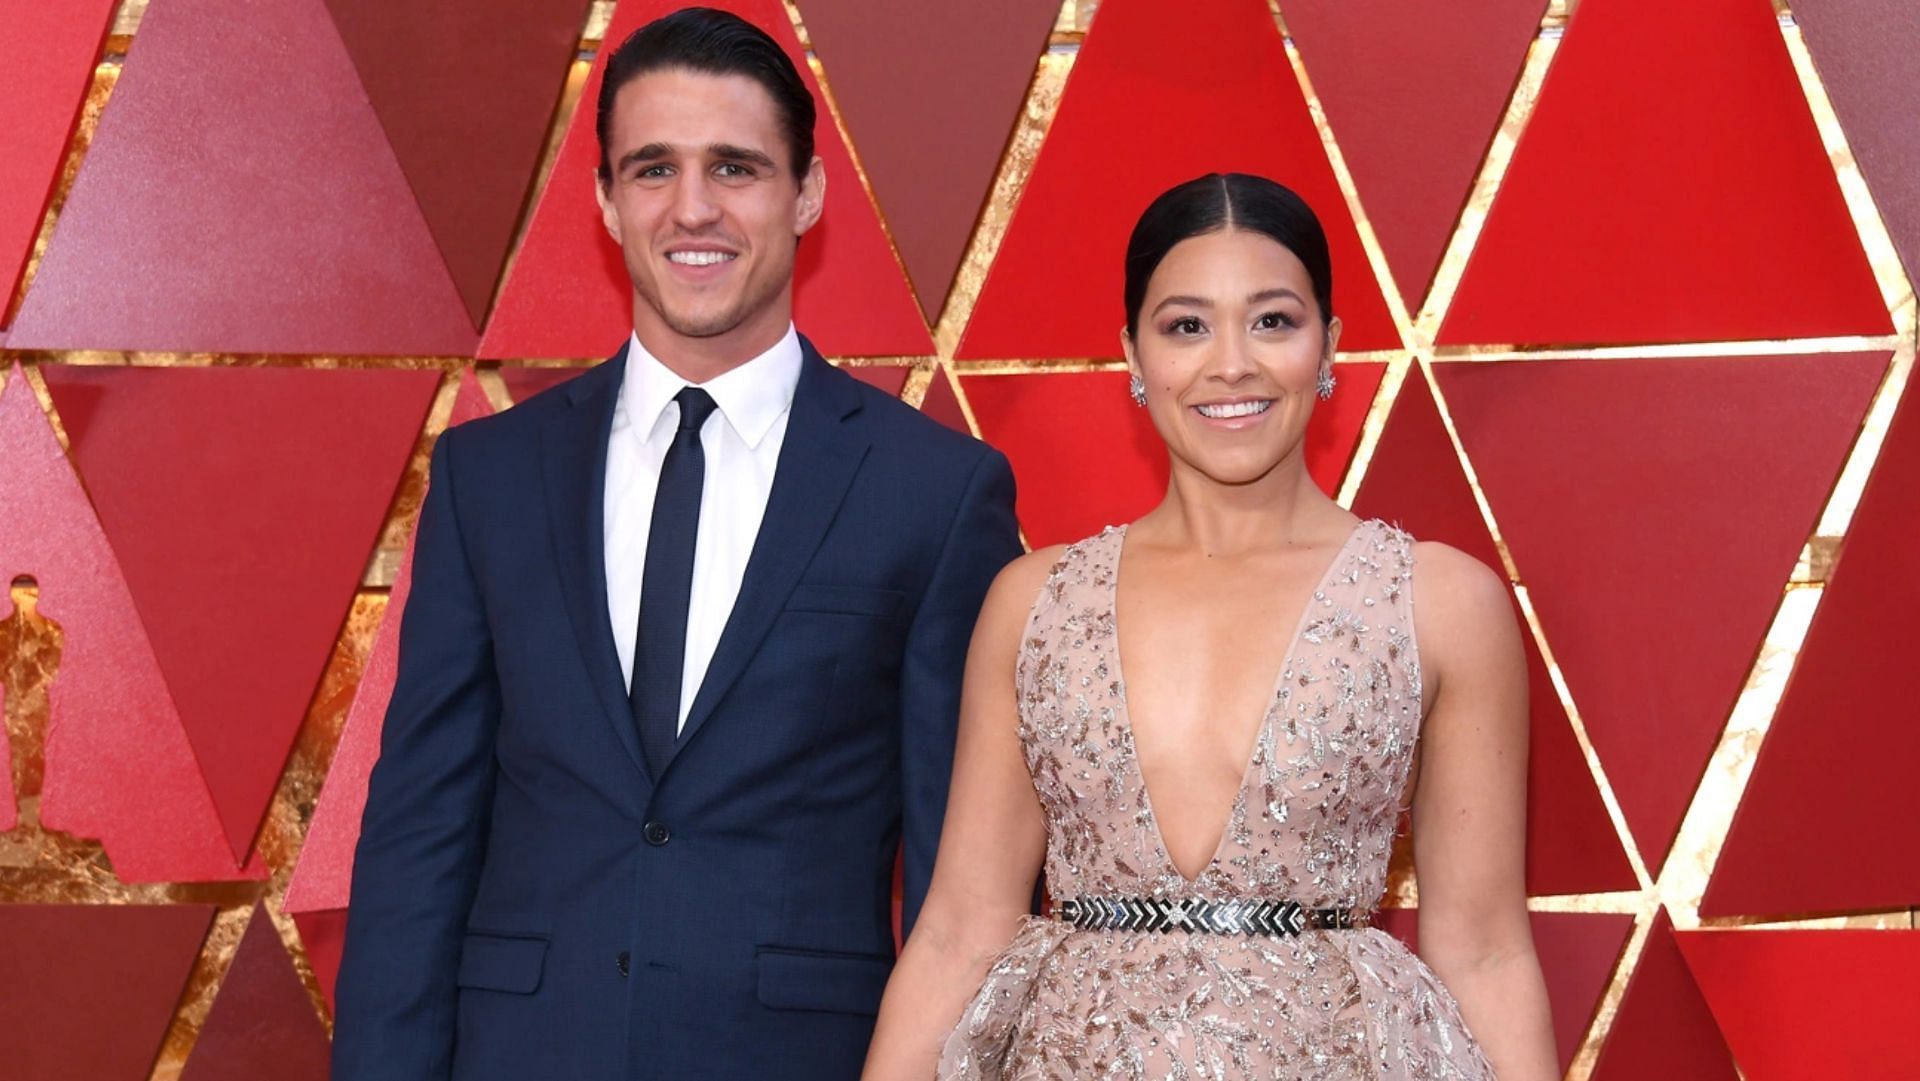 Gina Rodriguez and Joe LoCicero first met each other in 2016 on the set of Jane the Virgin. (Image via Kevork Djansezian/Getty)